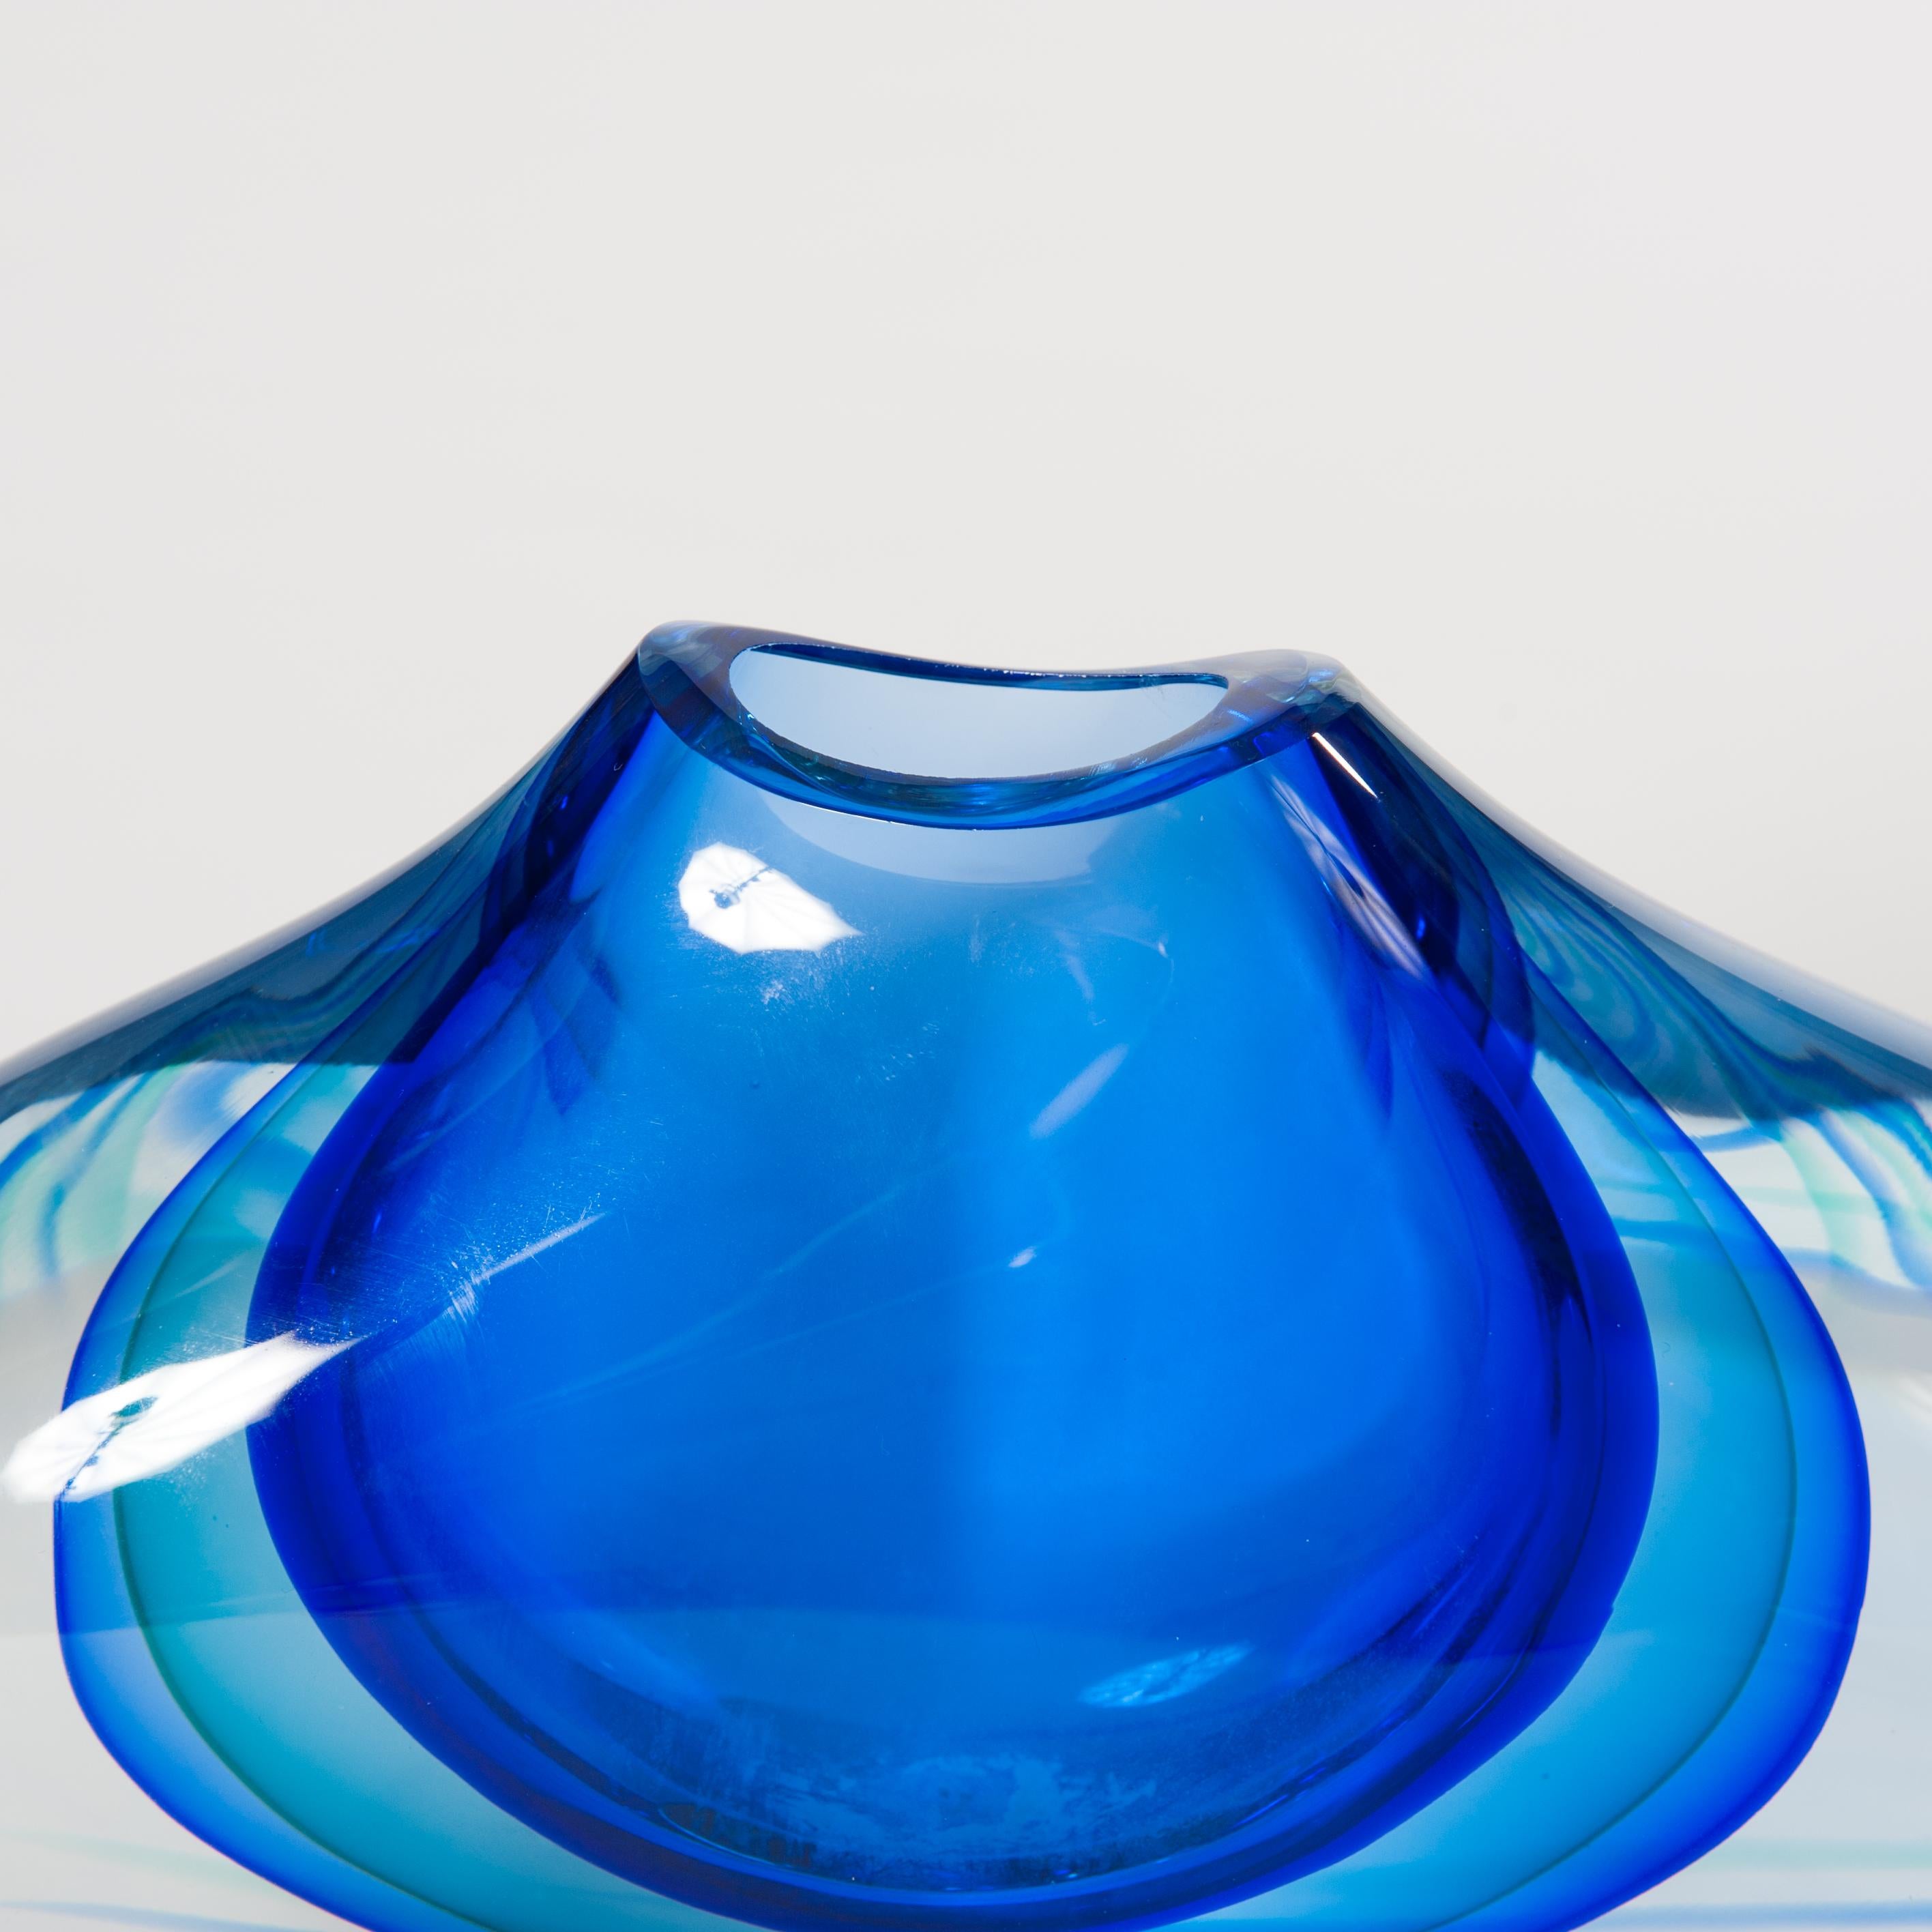 Unique Murano glass Sommerso vase in turquois - green - blue - transparent layers, signed by hand Michele Onesto at the bottom.
Solid (8.0kg) and massif vessel handmade in different color layering and a transparent base.
The shape is slightly